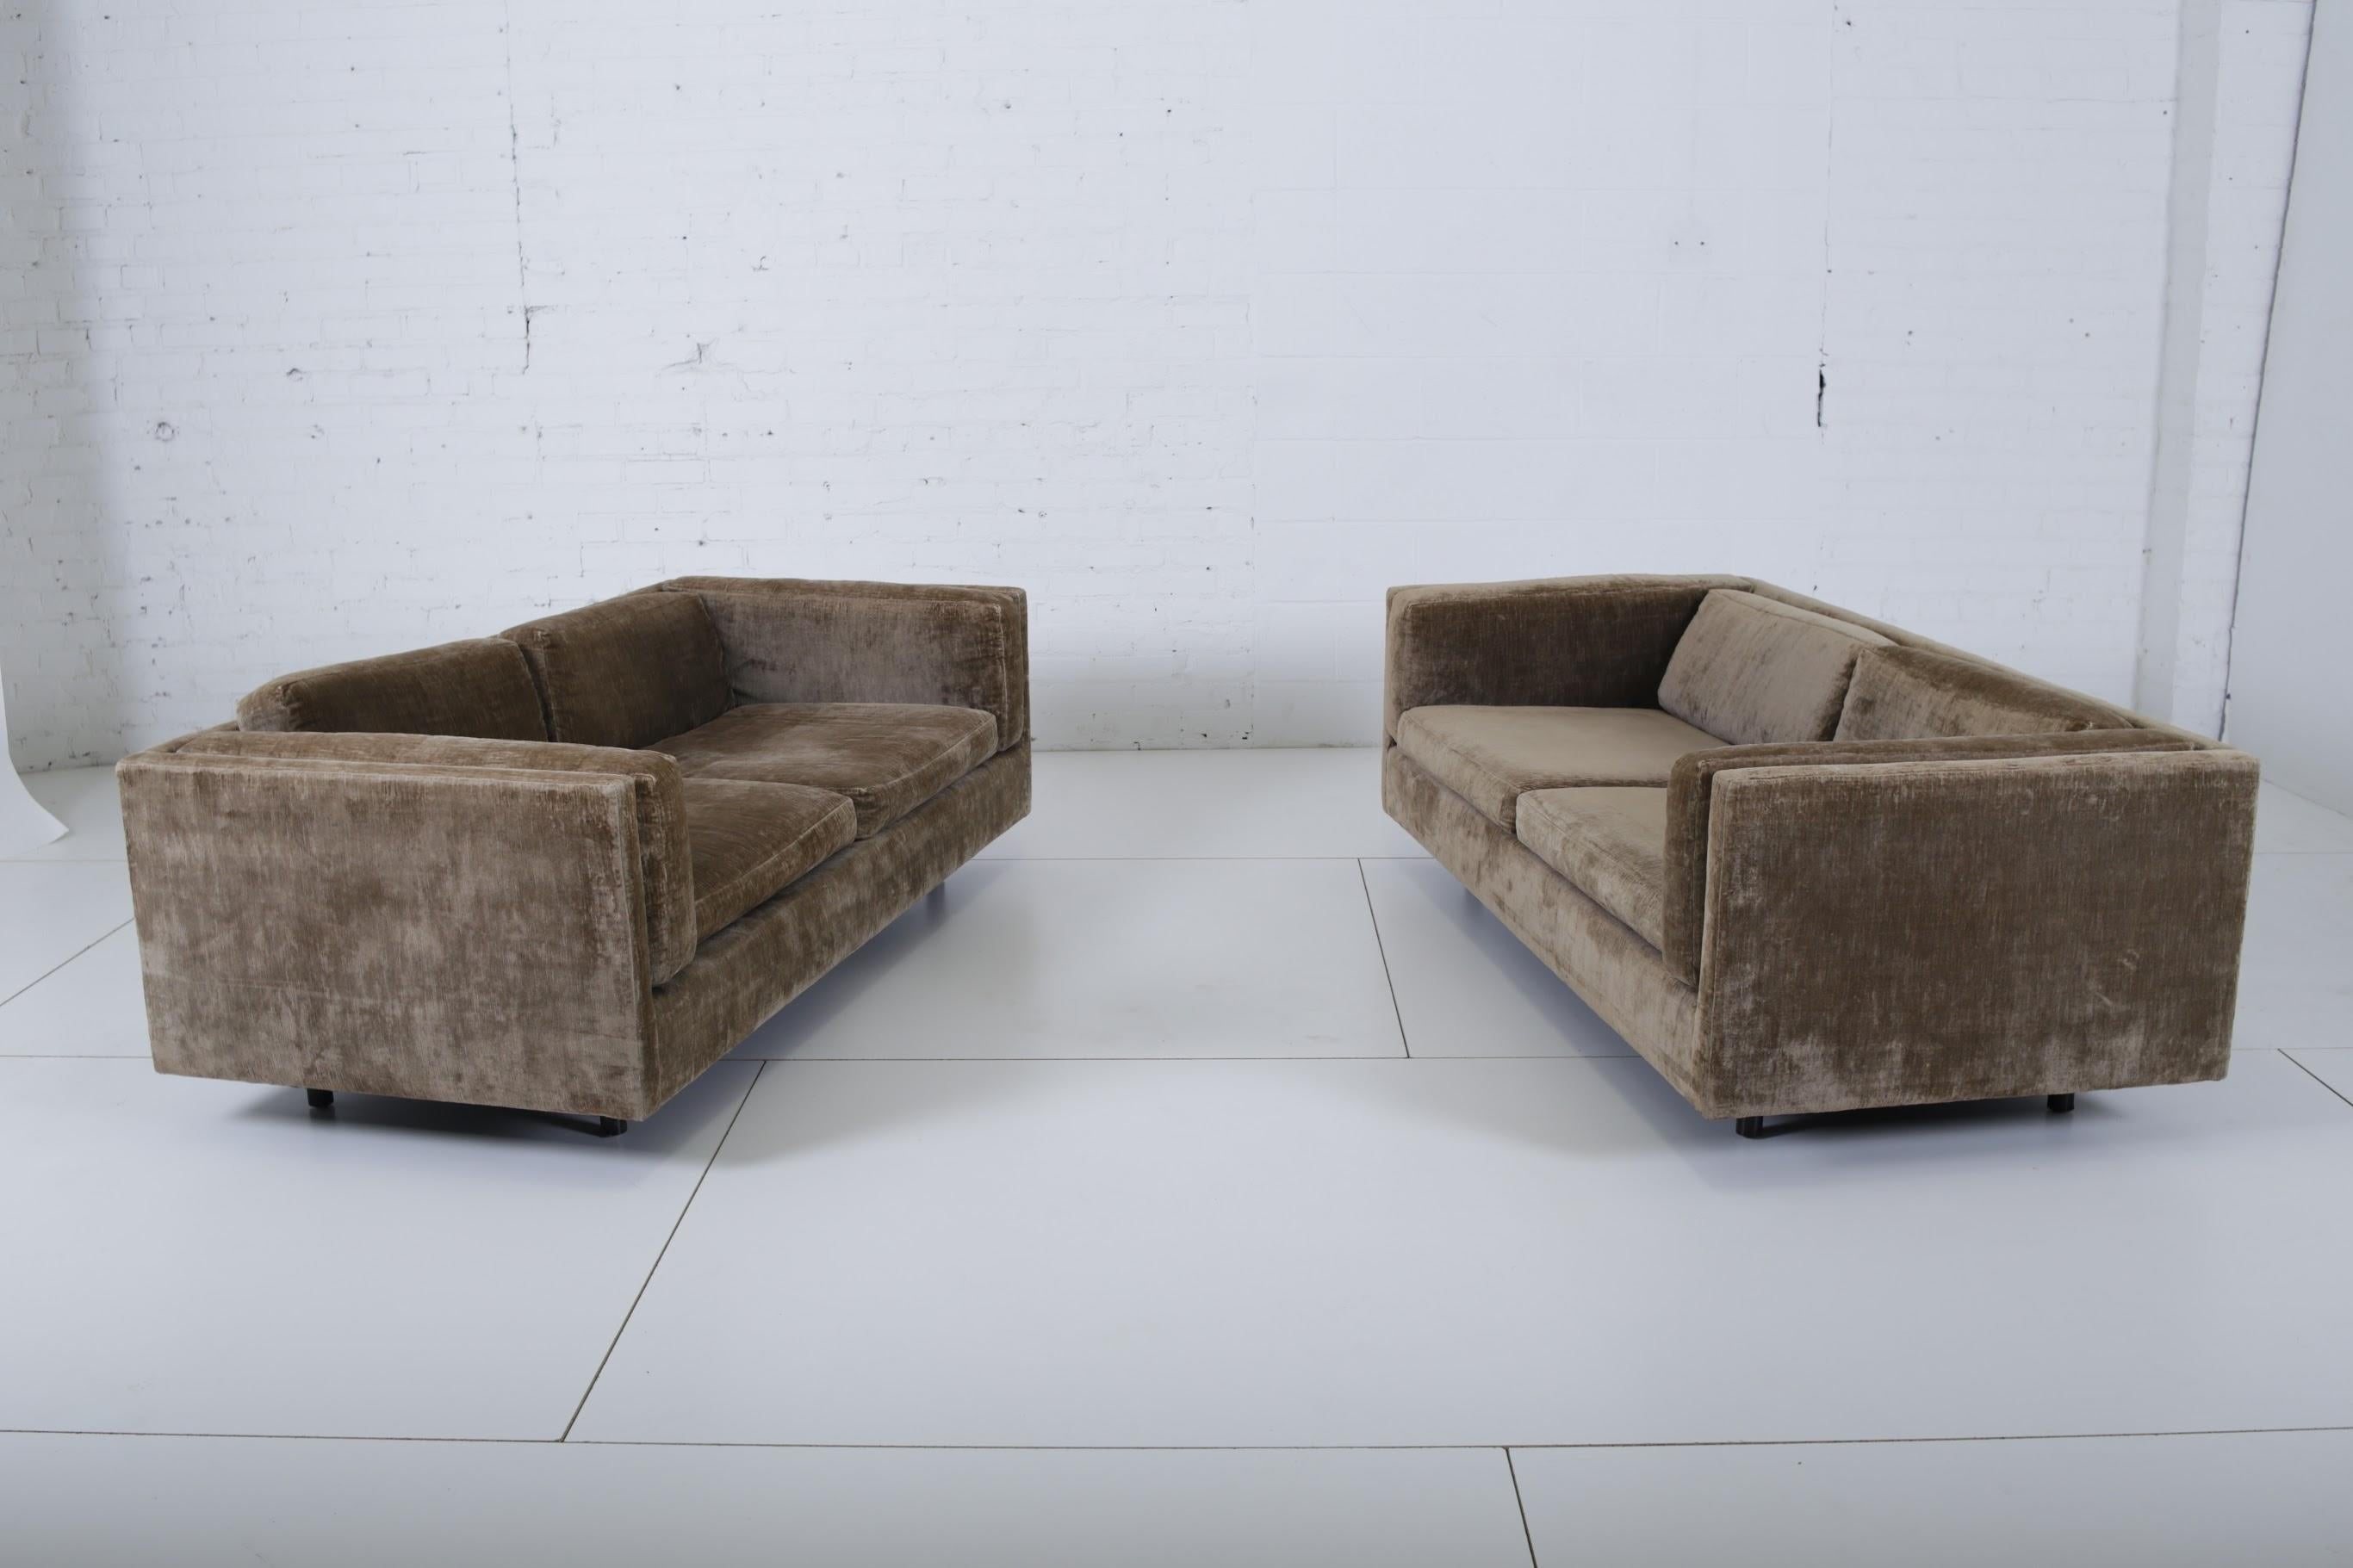 Tuxedo sofa settees by Harvey Probber. Original velvet fabric on rosewood legs. Pair available. Priced individually.